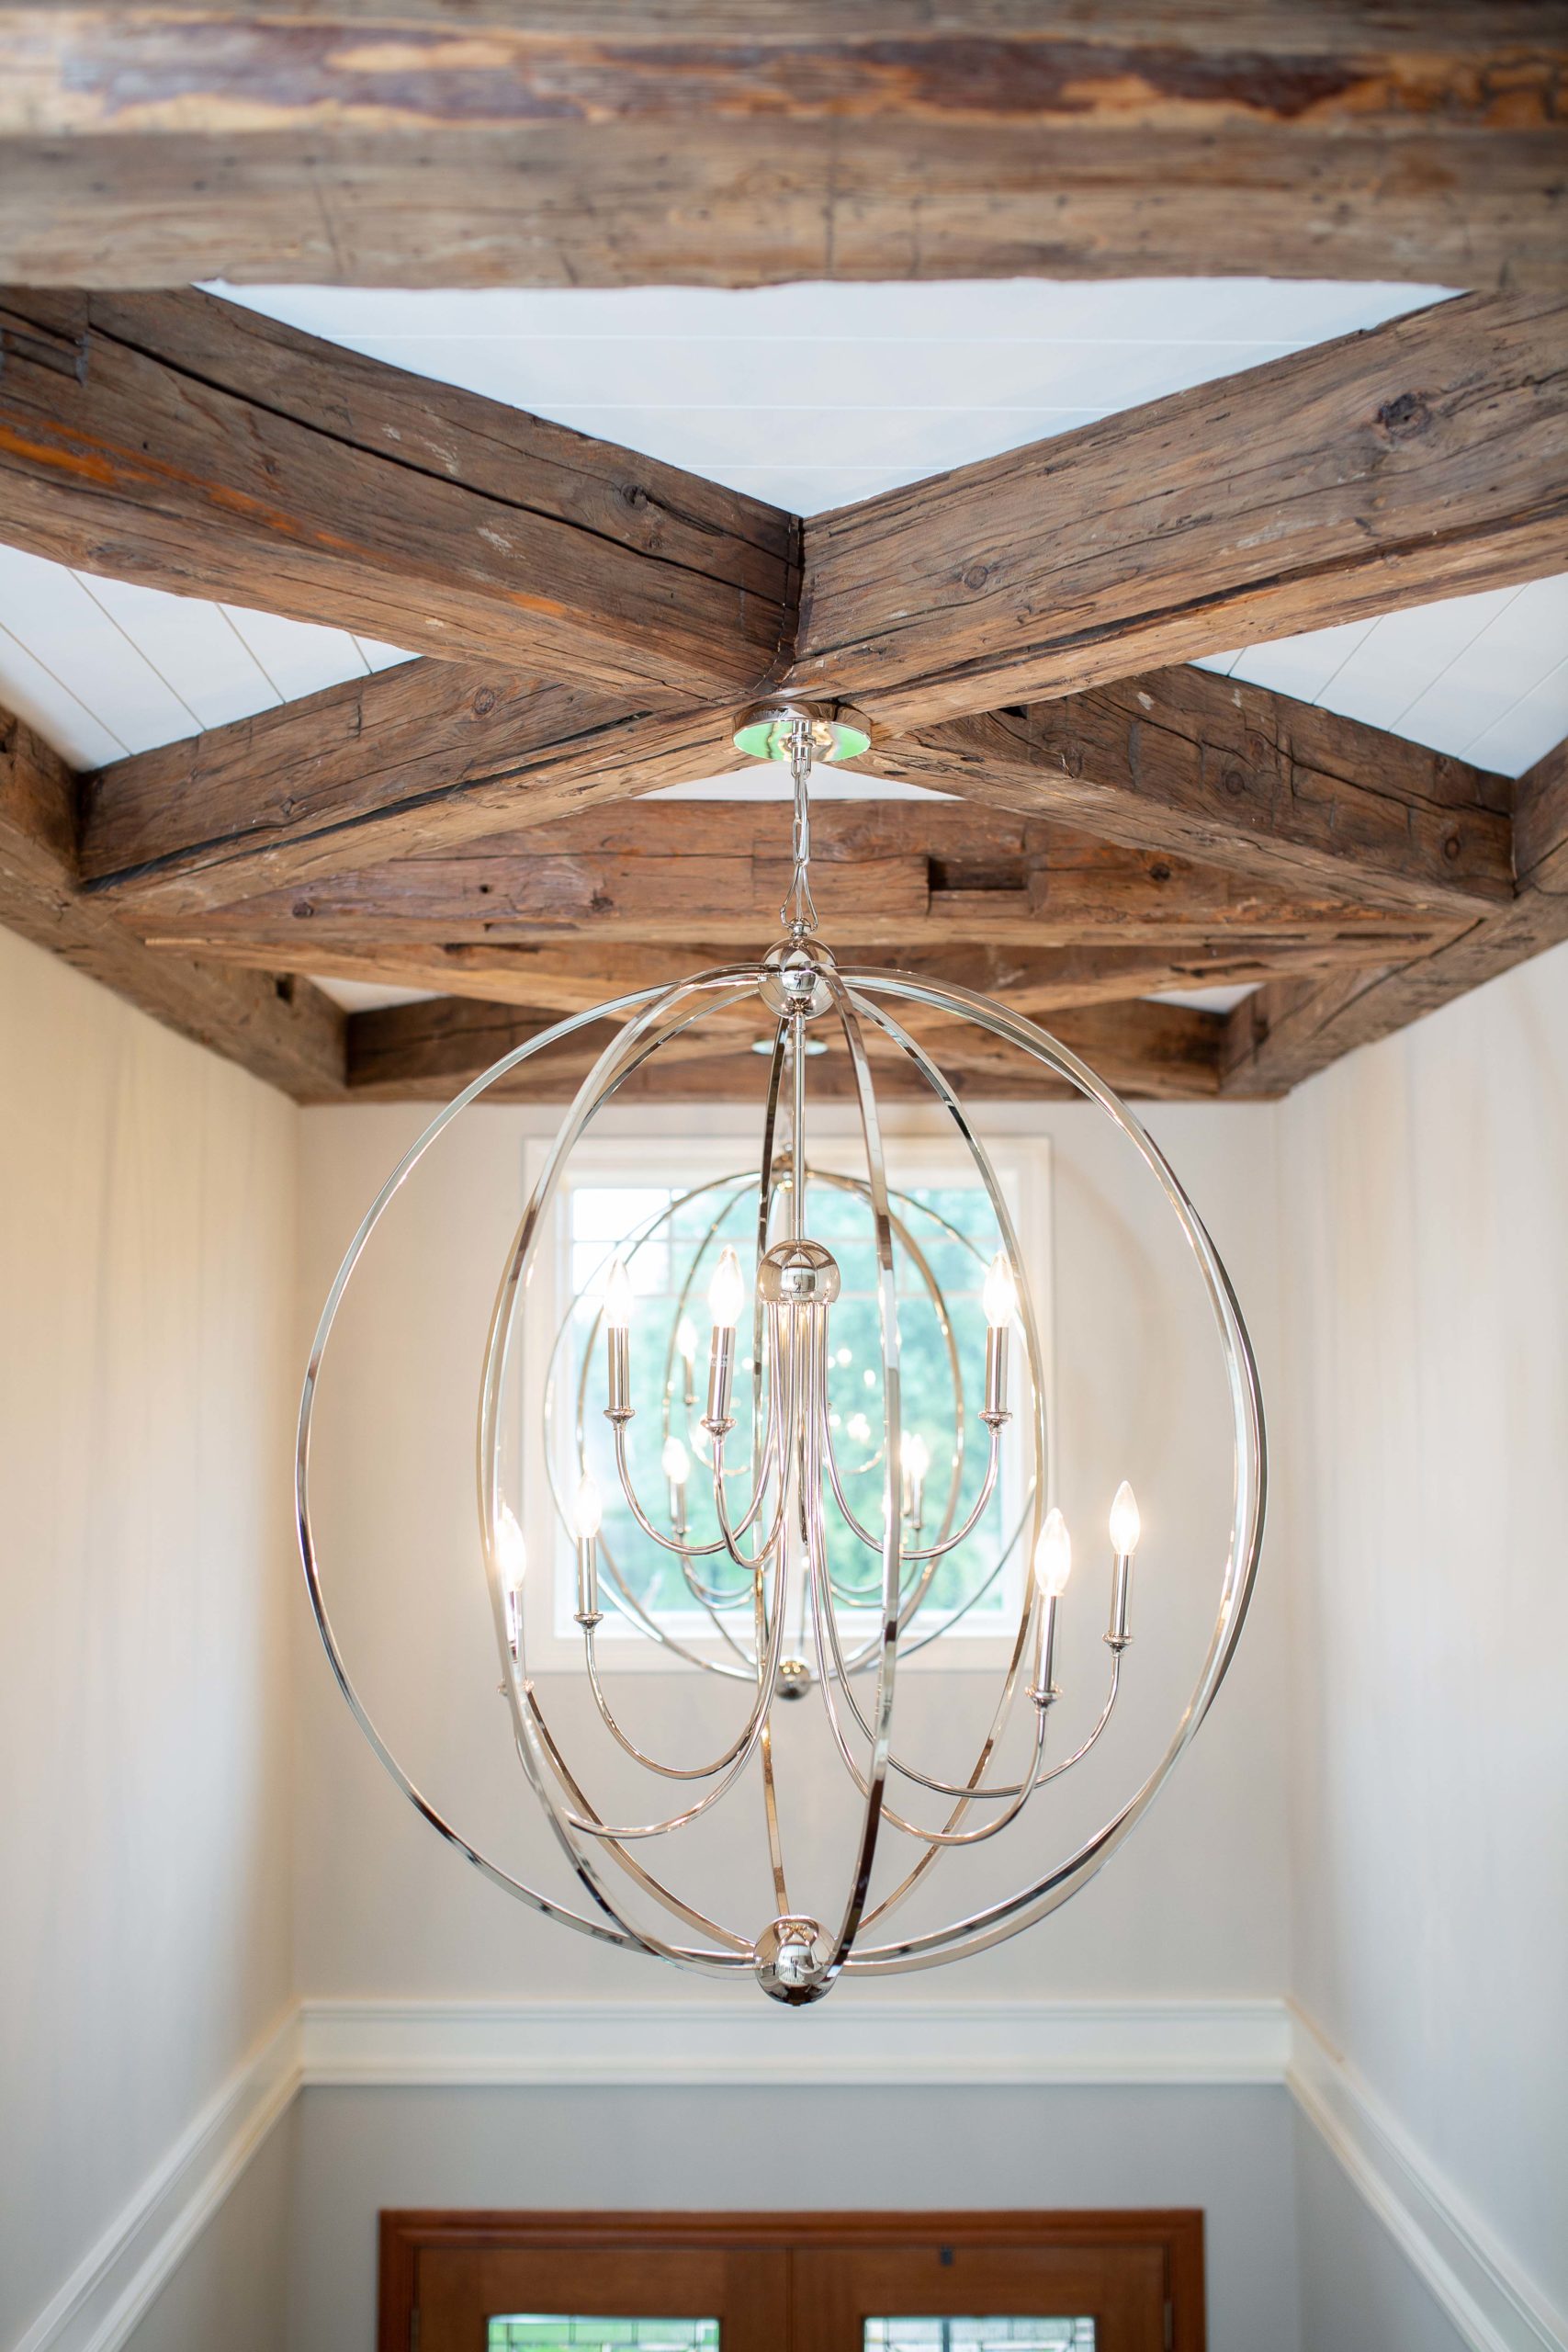 round chandelier light hung from reclaimed wood ceiling beams